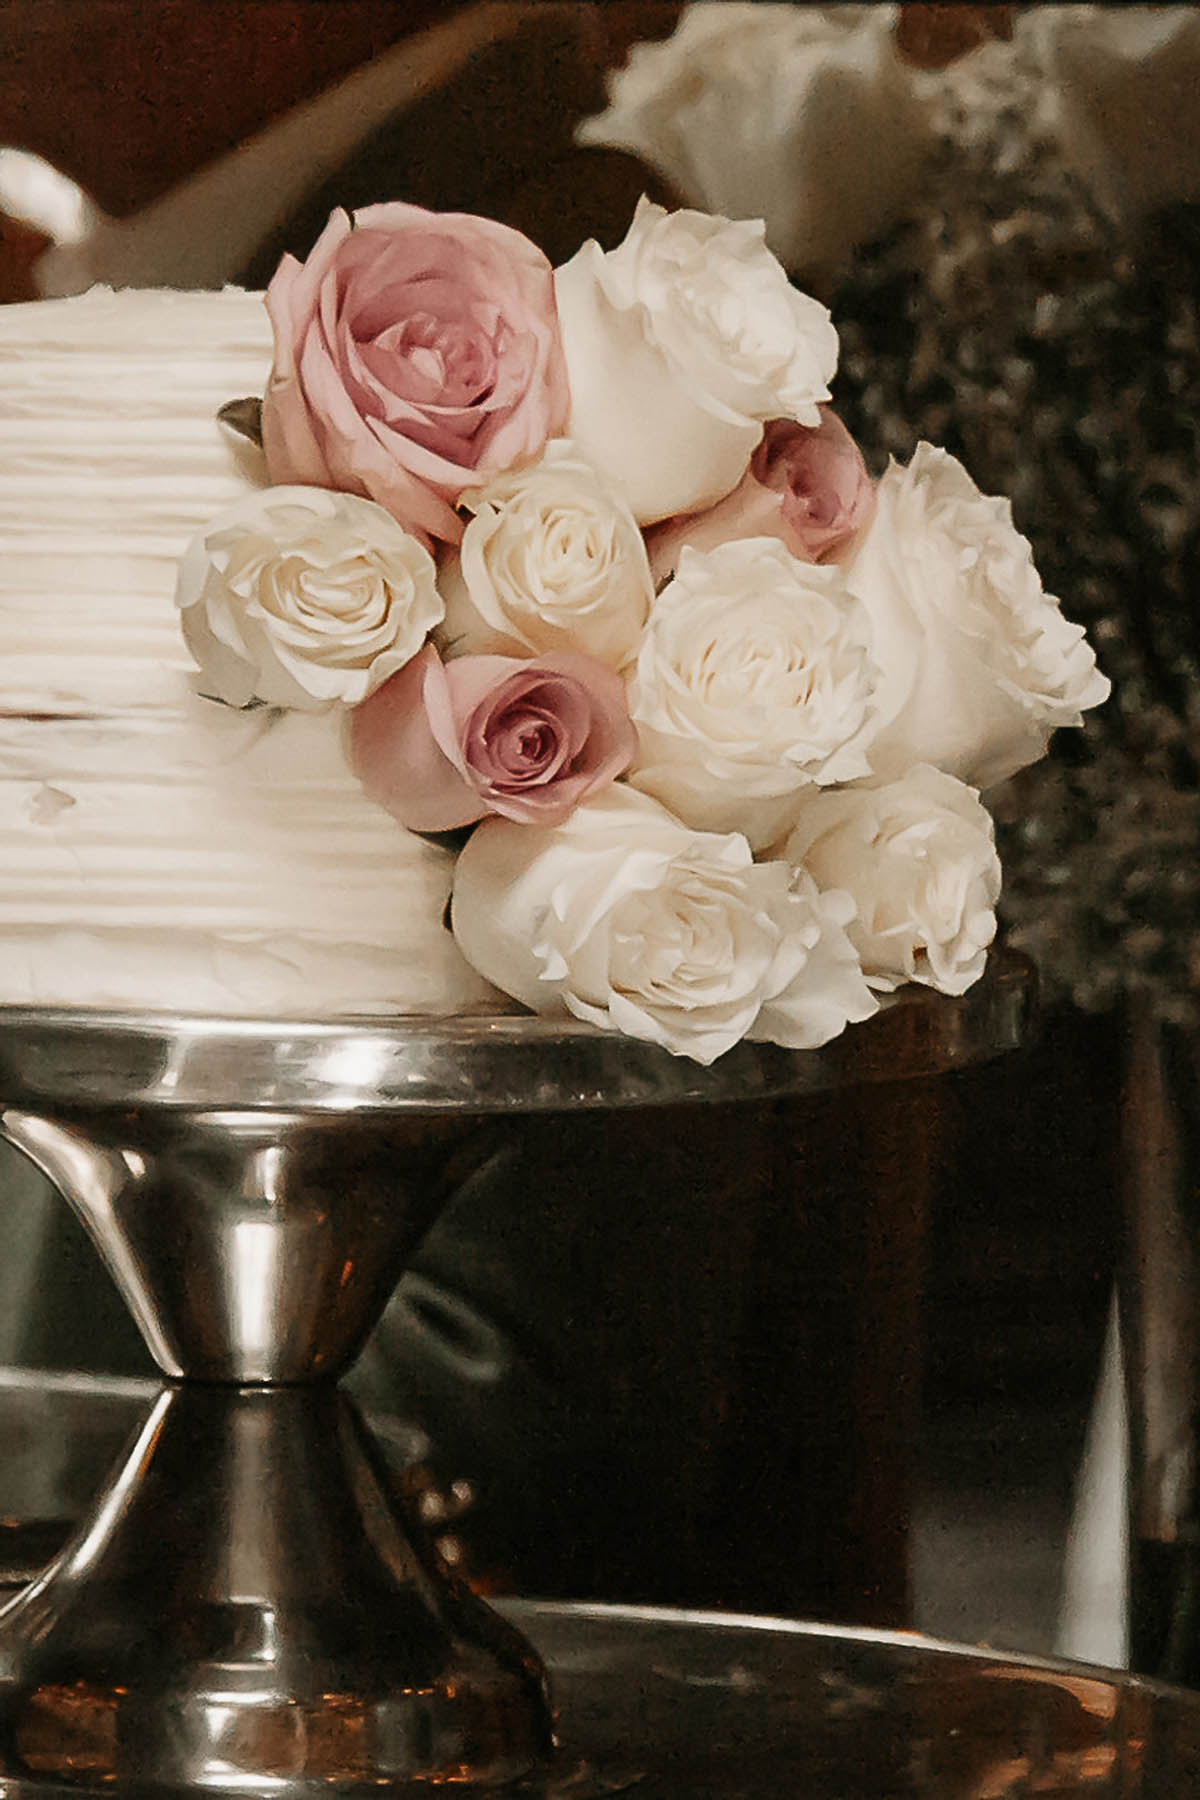 A two tier white cake with pink and white roses